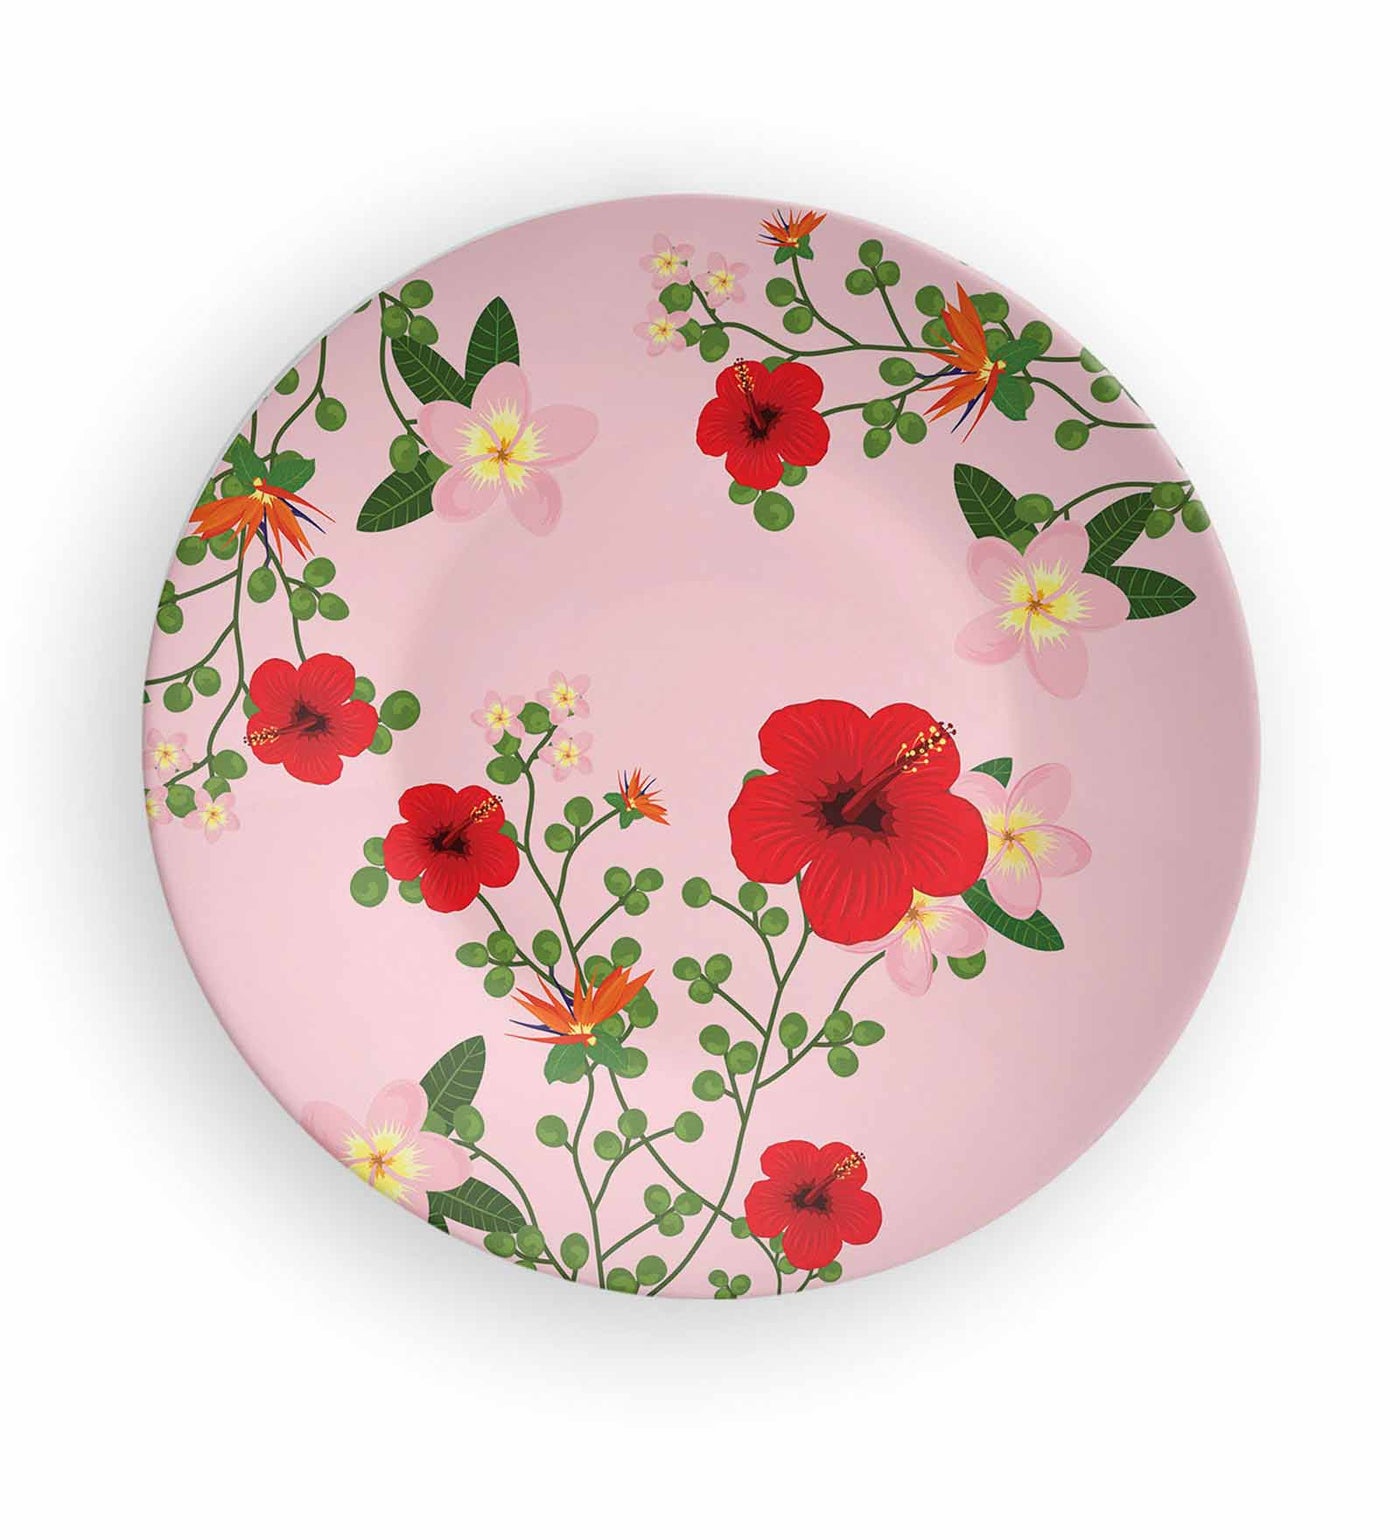 Rich Floral Beauty of Indian Decorative Wall Plates - Wall Decor - 3